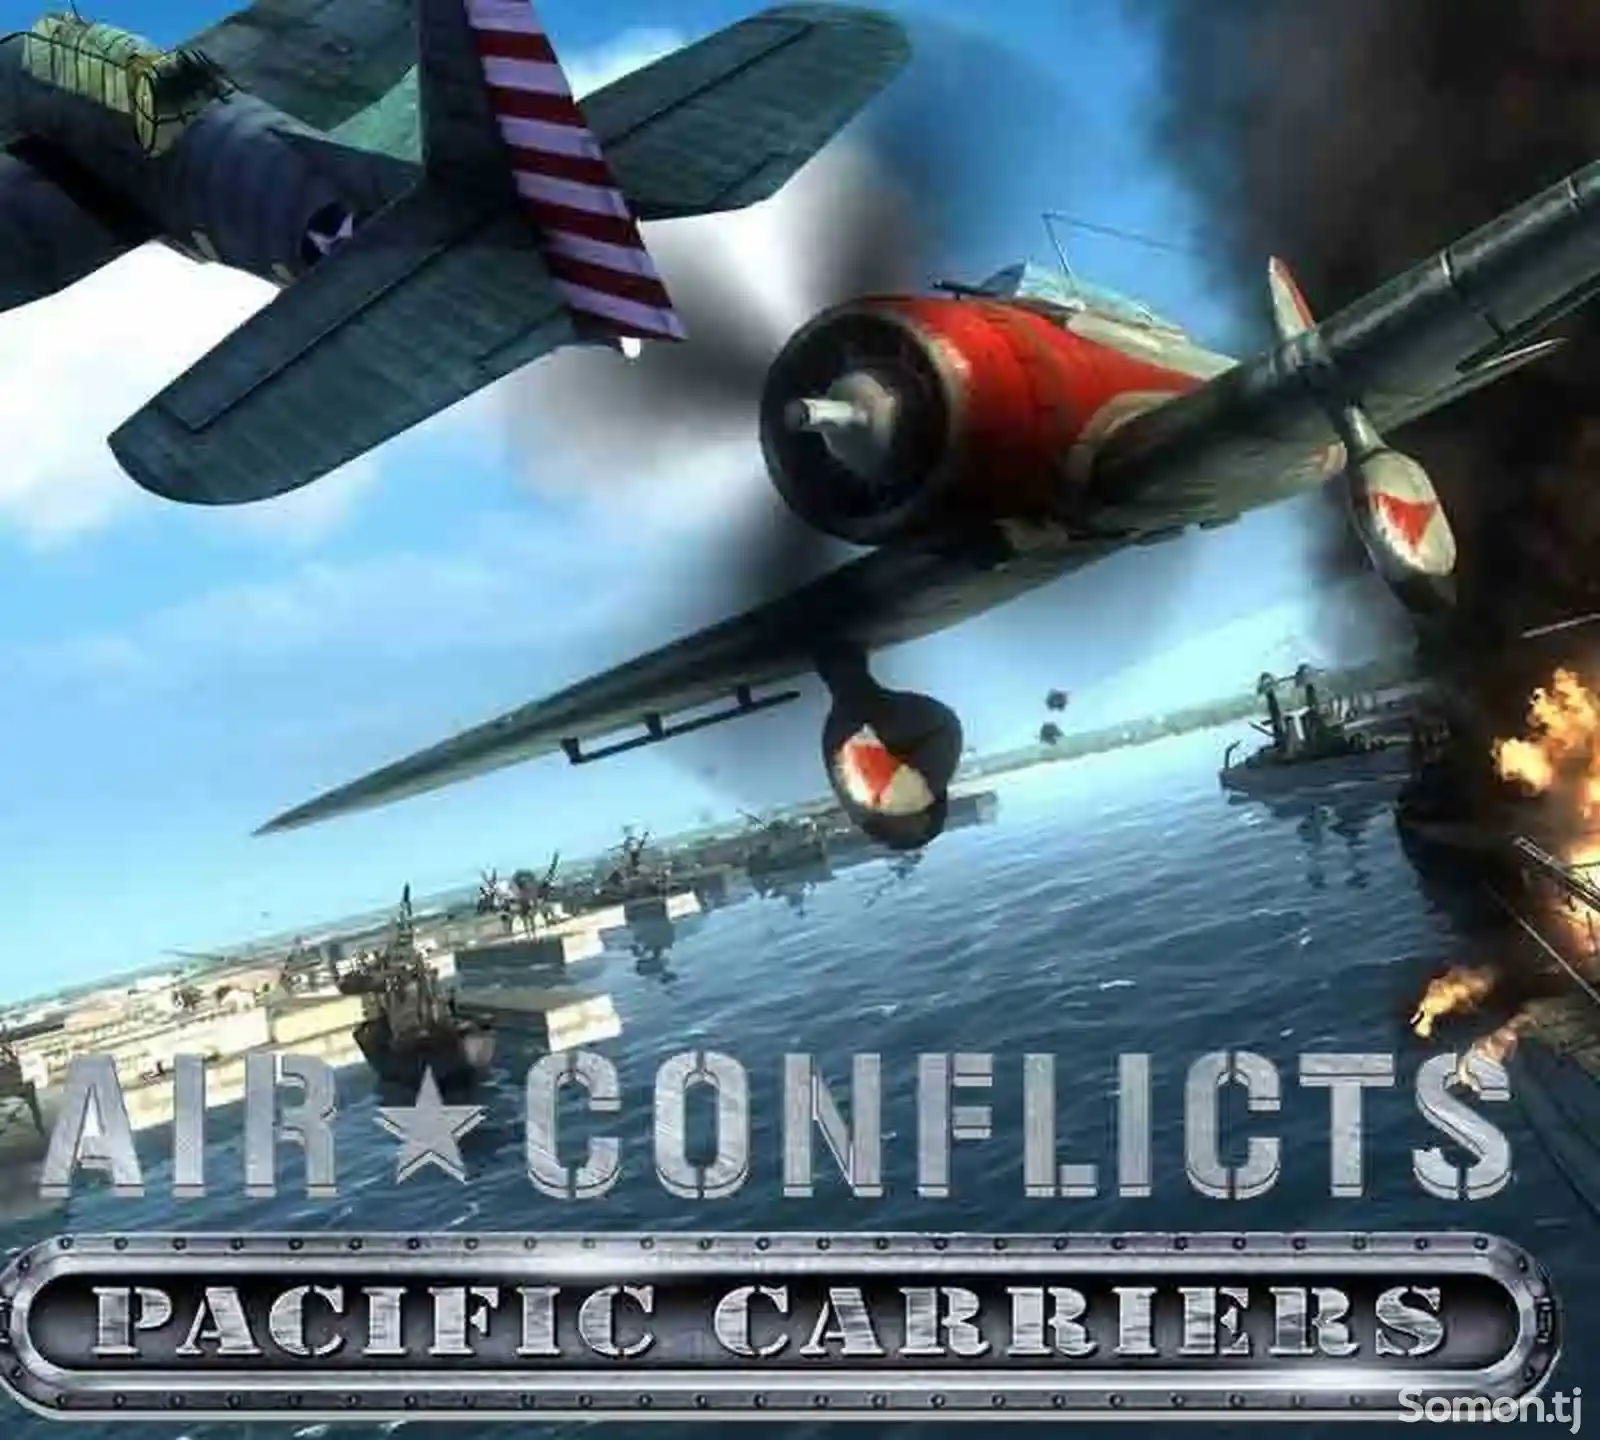 Игра Air conflicts pacific carrie для PS-4 / 5.05 / 6.72 / 7.02 / 7.55 / 9.00 /